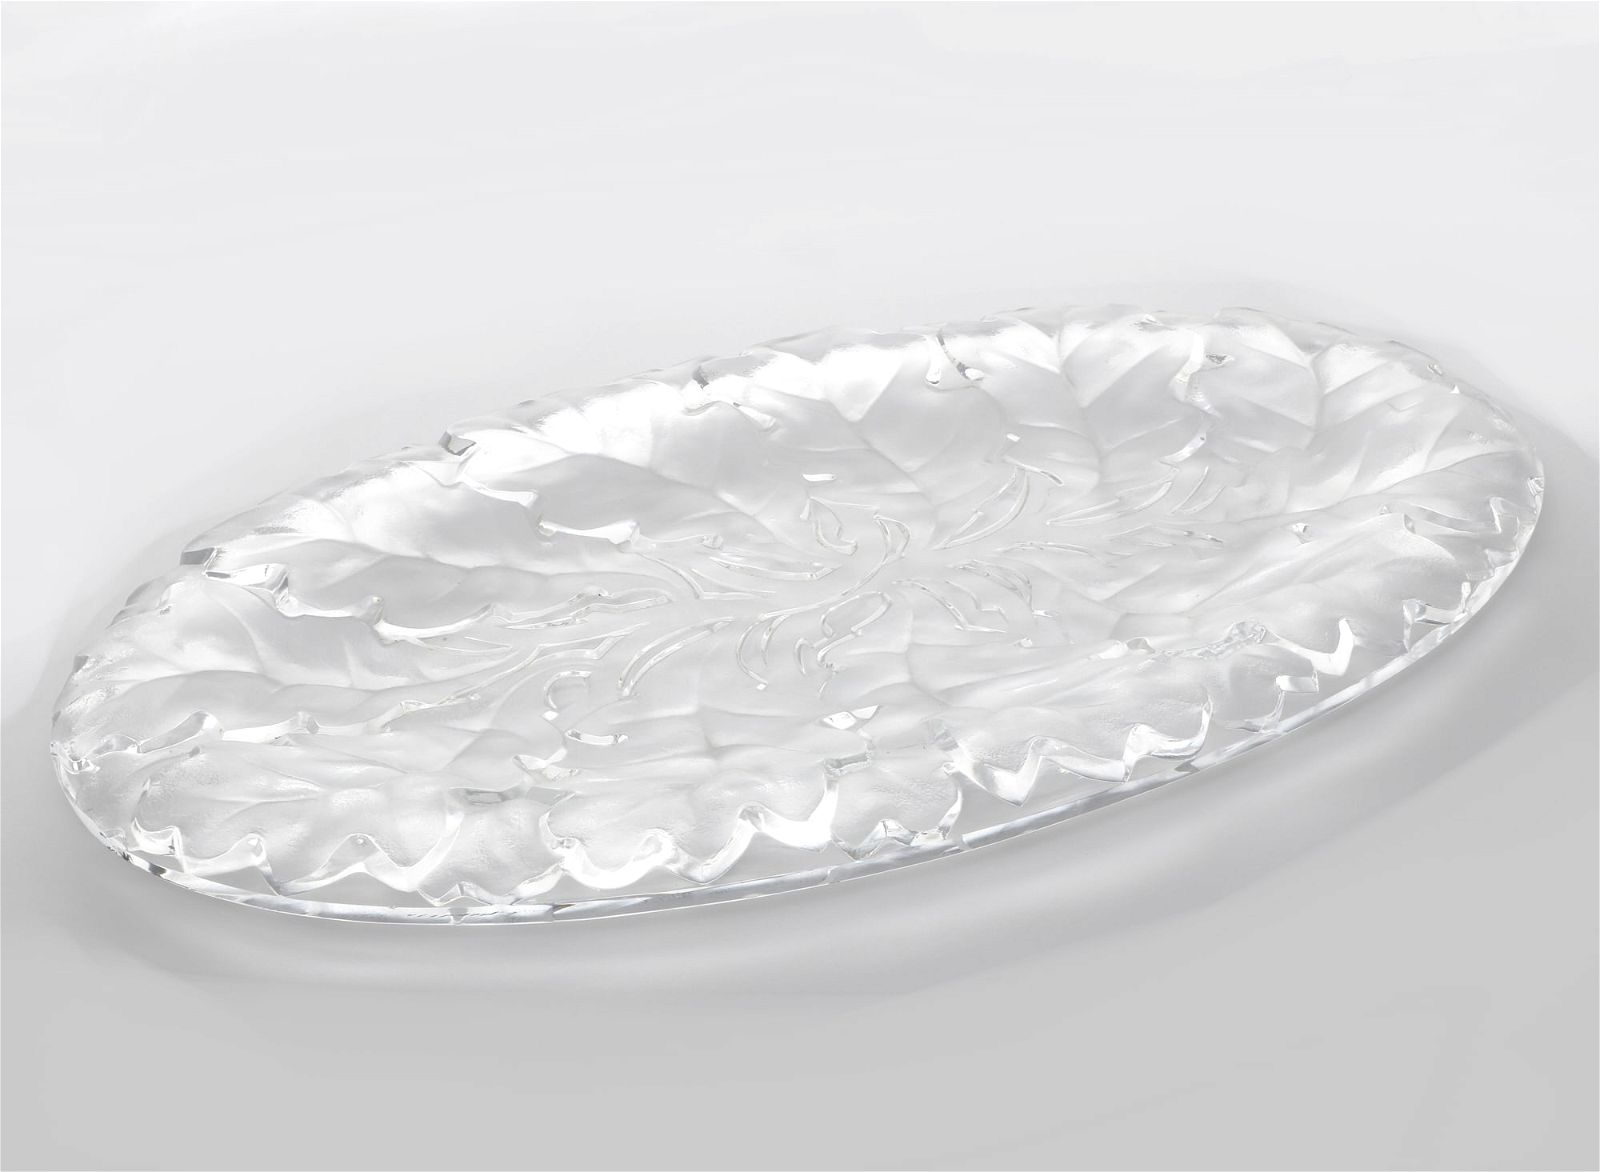 A LALIQUE CLEAR AND FROSTED GLASS